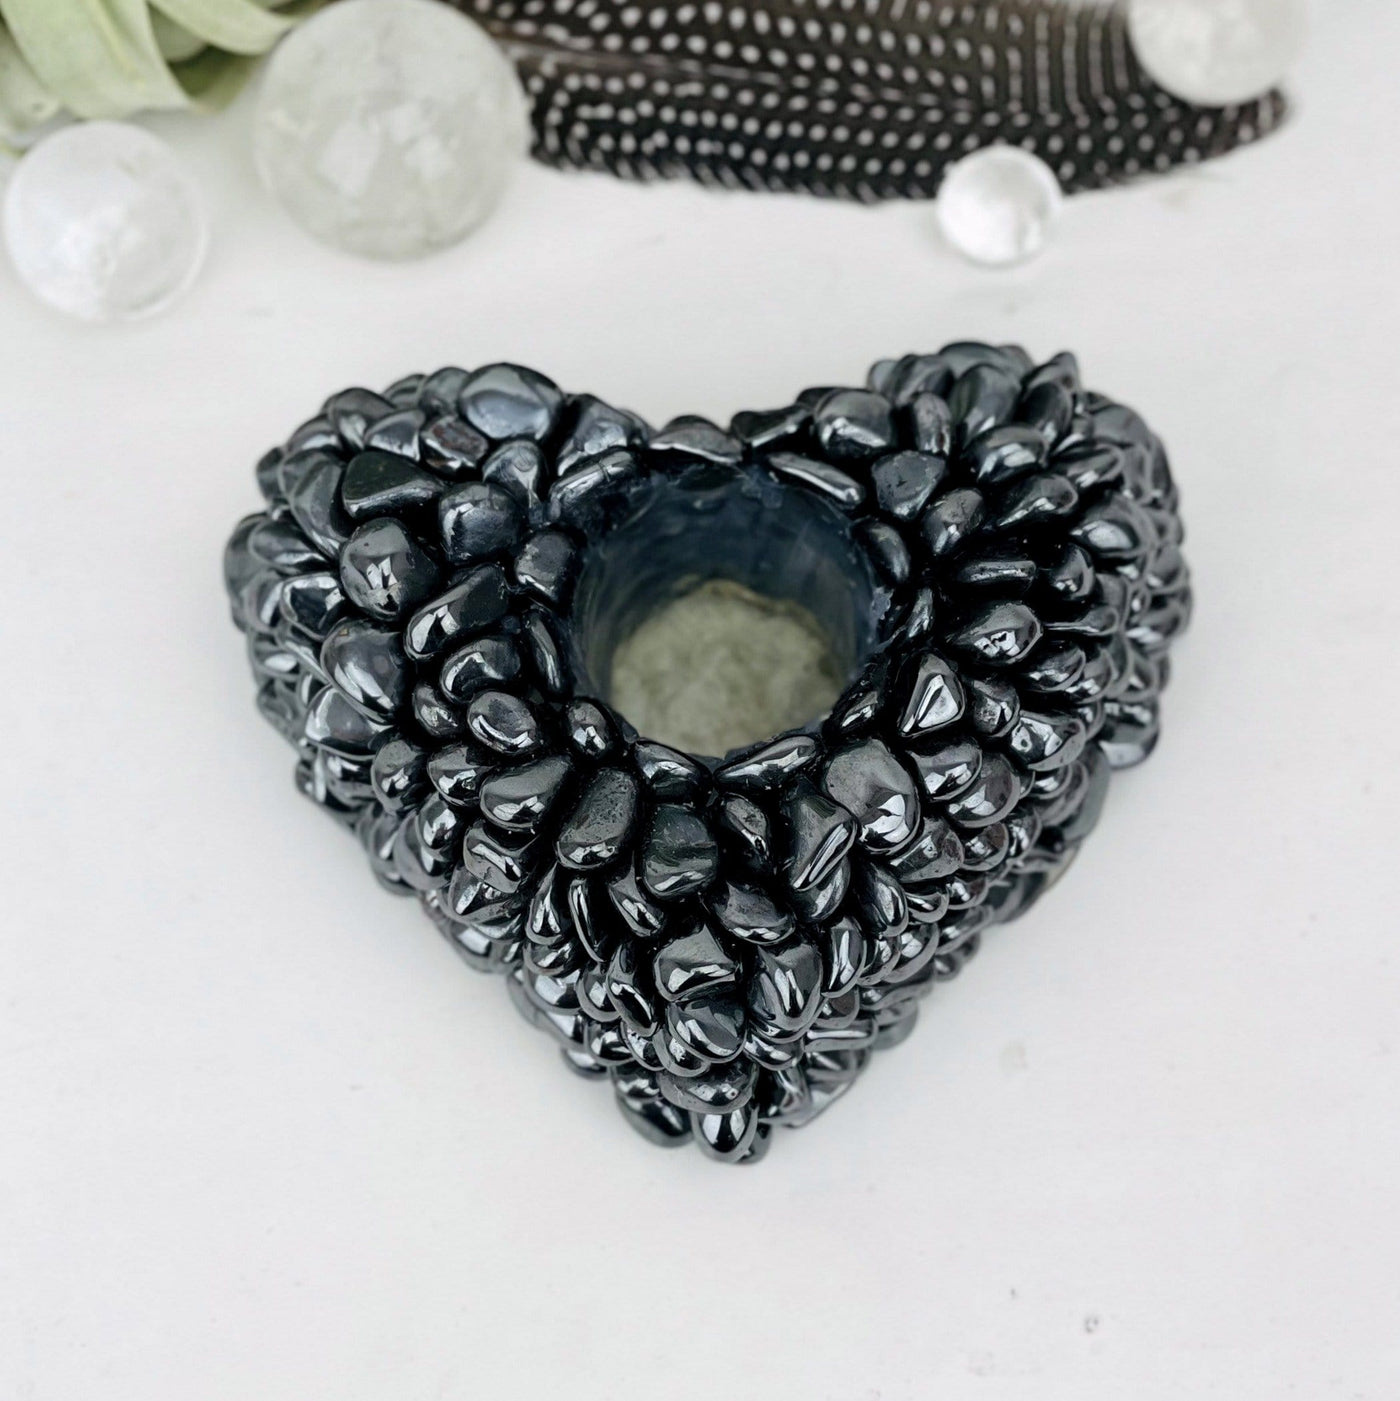 hematite tumbled stone heart candle holder - close up on a table